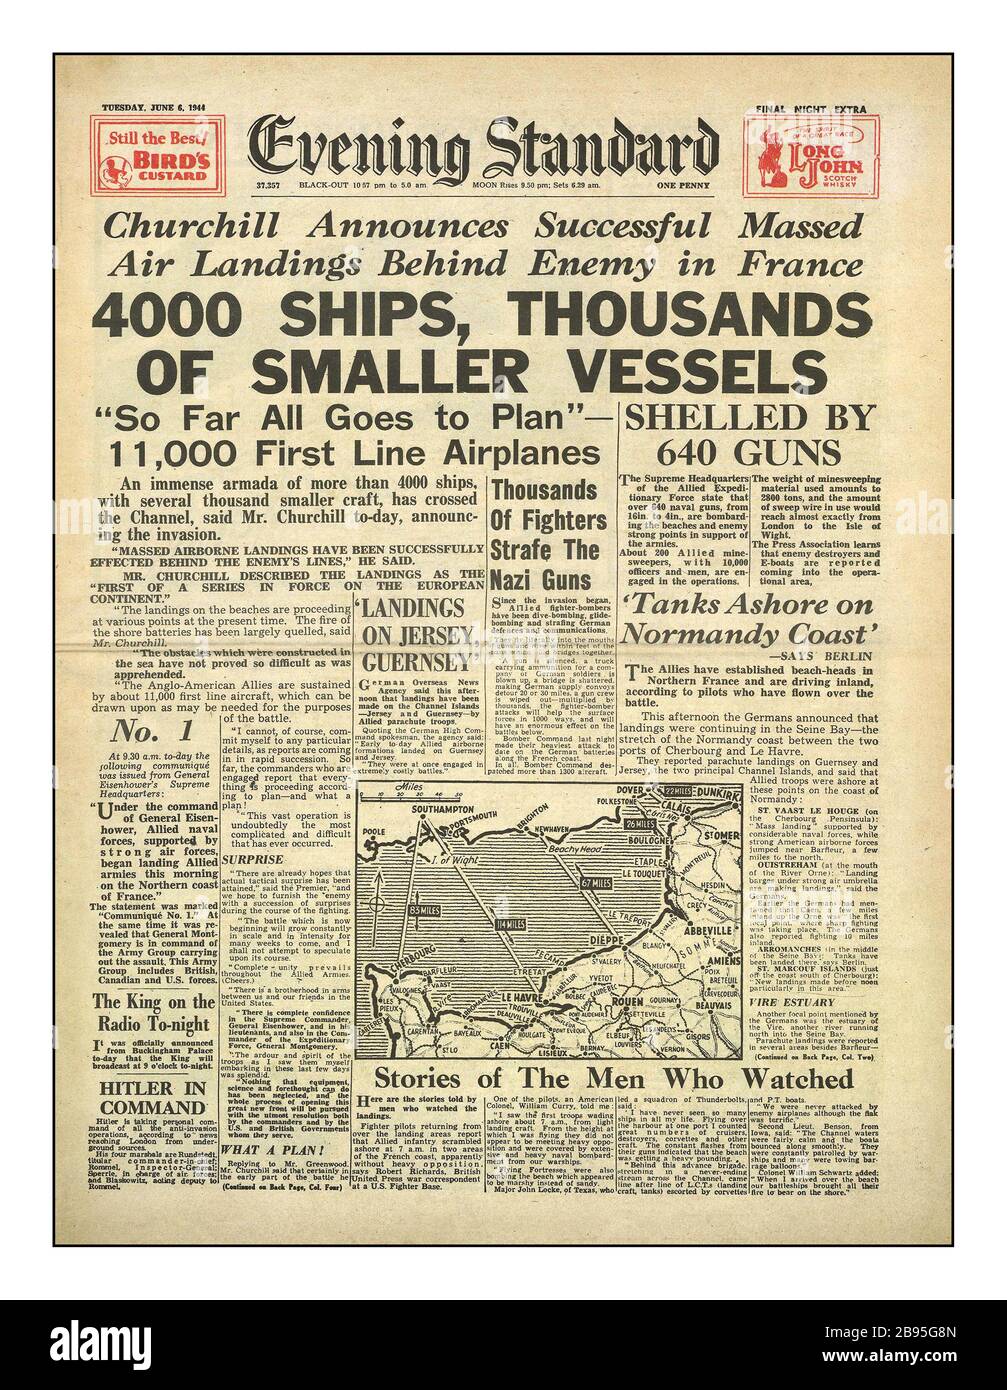 Archive D-Day June 6th 1944 British Newspaper Headlines Evening Standard UK '4000 ships Thousands of smaller vessels' 'so far all goes to plan' "Churchill Announces Successful Massed Air Landings Behind Enemy in France" Stock Photo